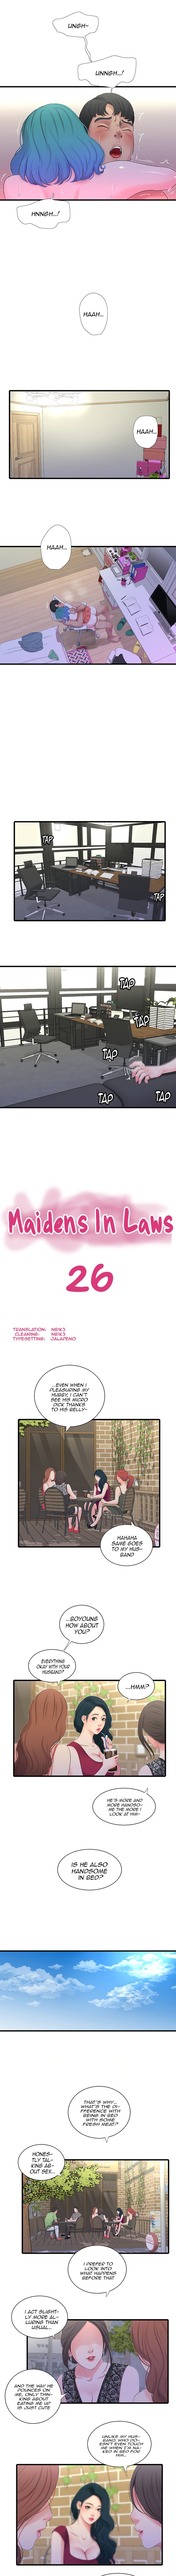 maidens-in-law-chap-26-0